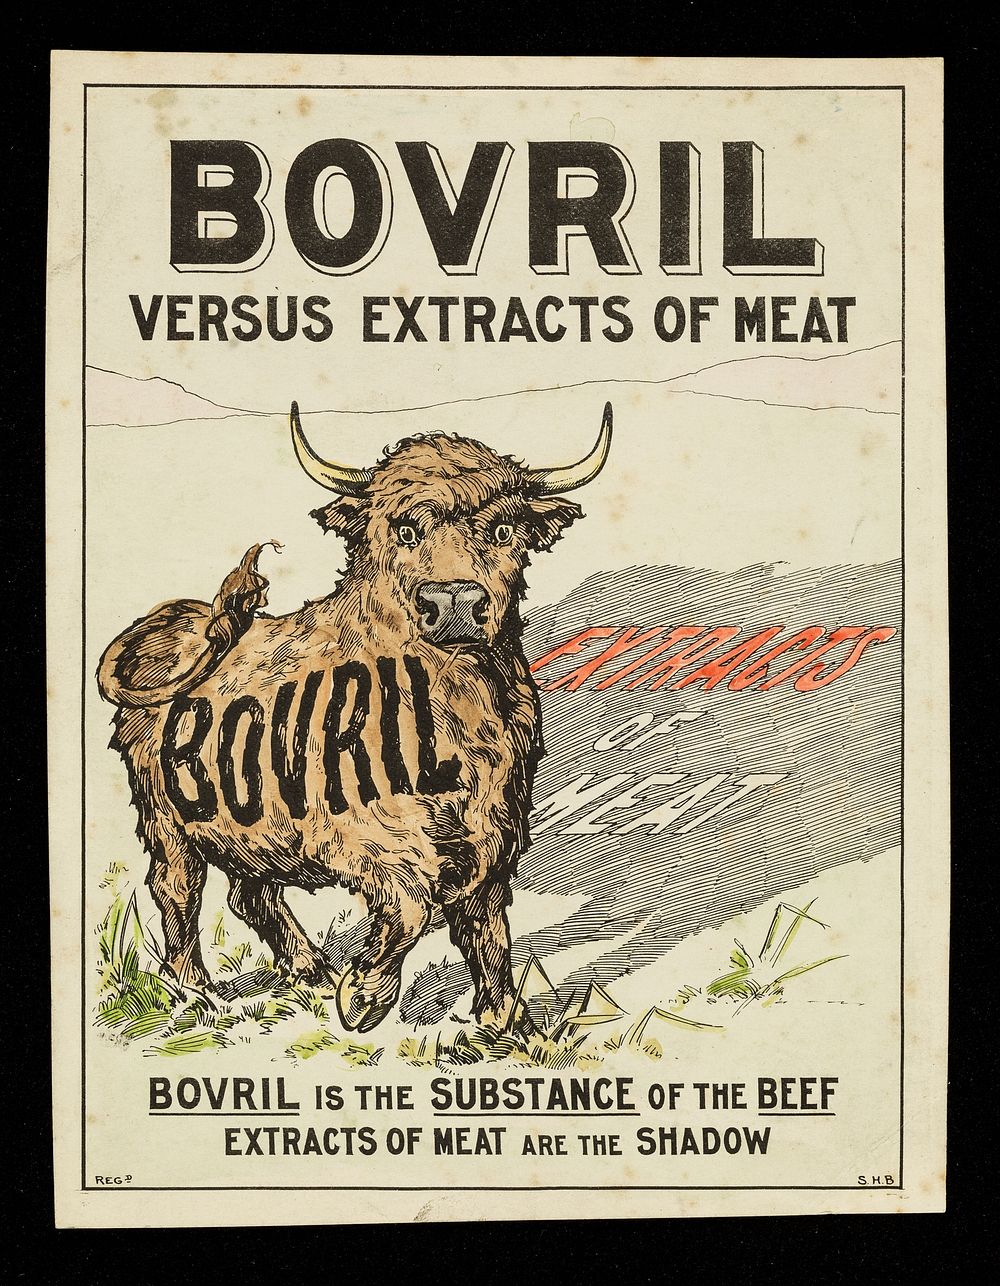 Bovril versus extracts of meat : Bovril is the substance of the beef, extracts of meat are the shadow / [Bovril Limited].